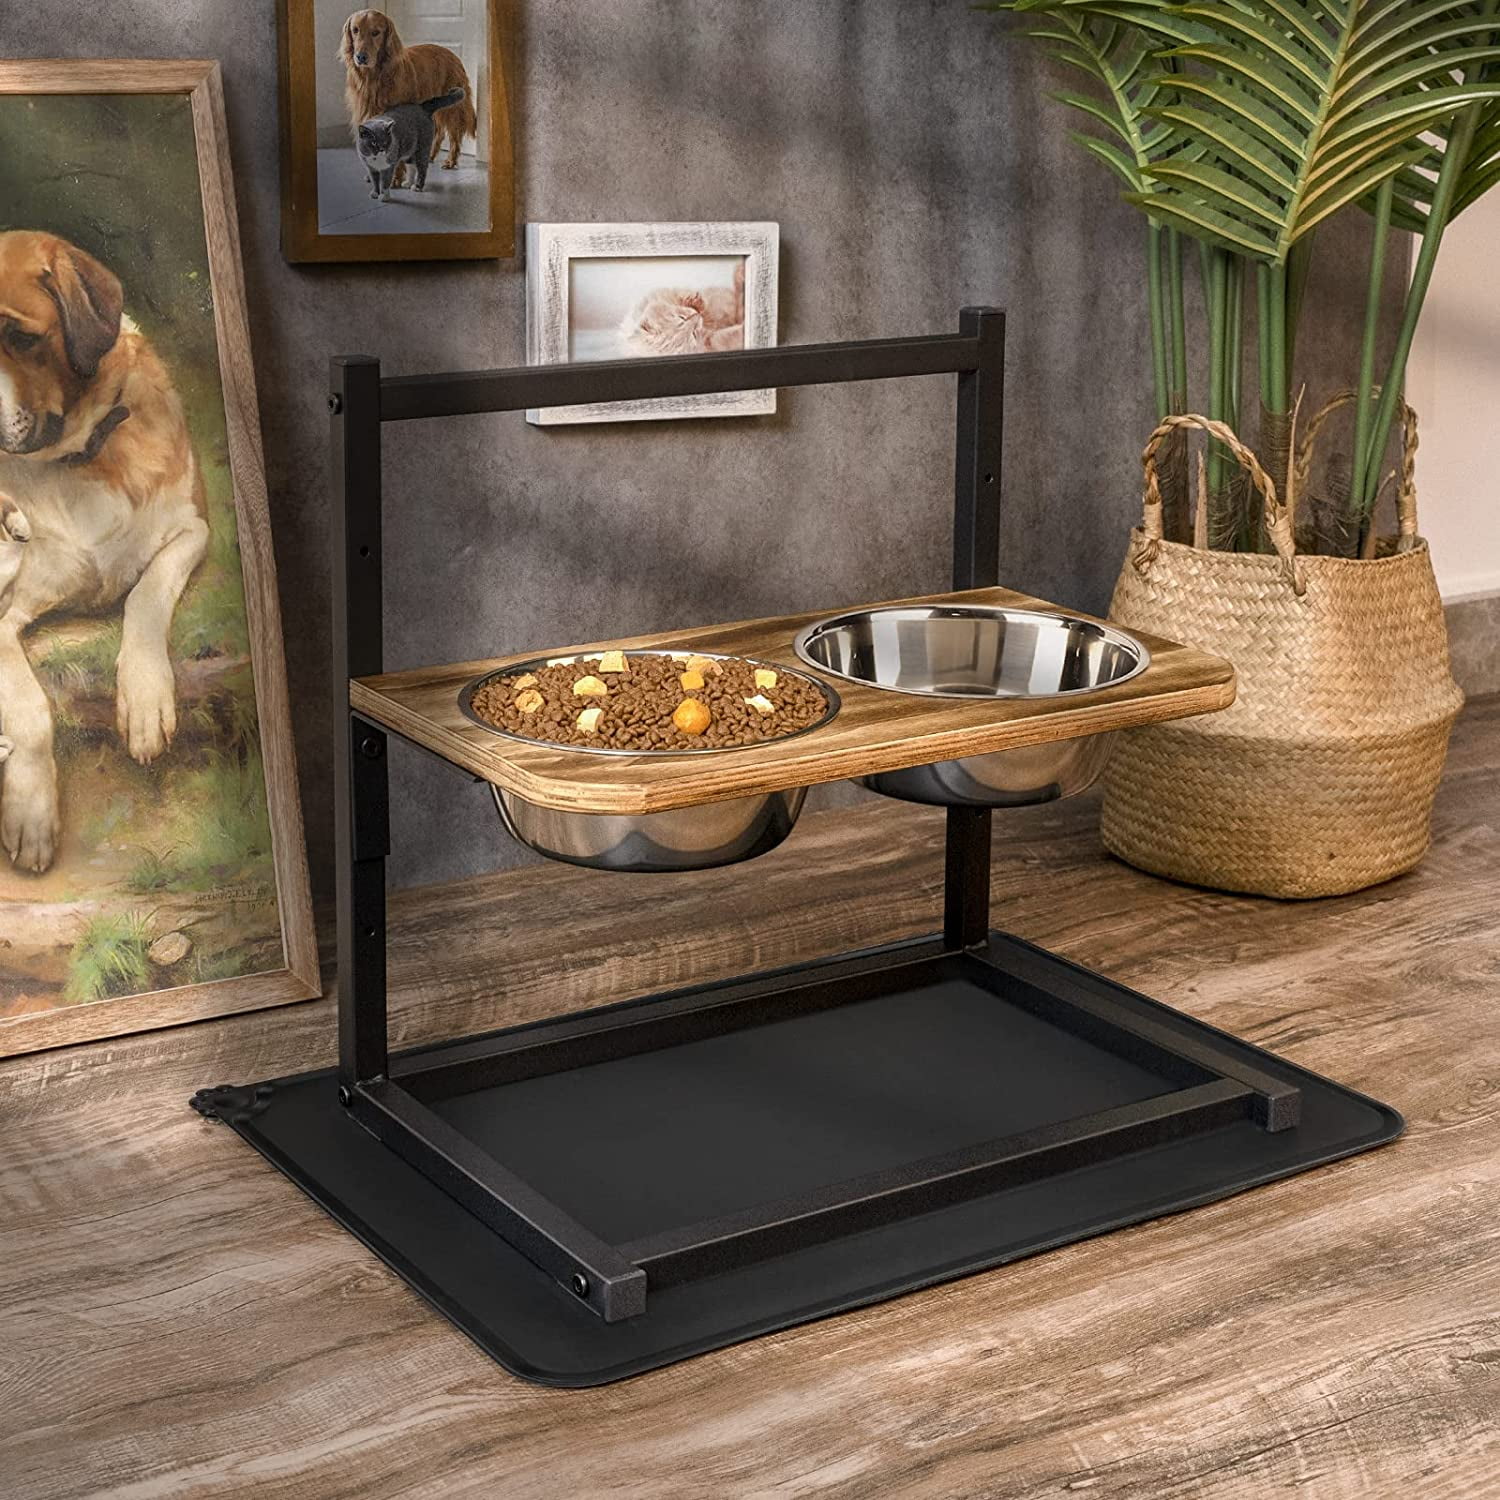 Siooko Elevated Dog Bowls for Large Dogs Wood Raised Dog Bowl